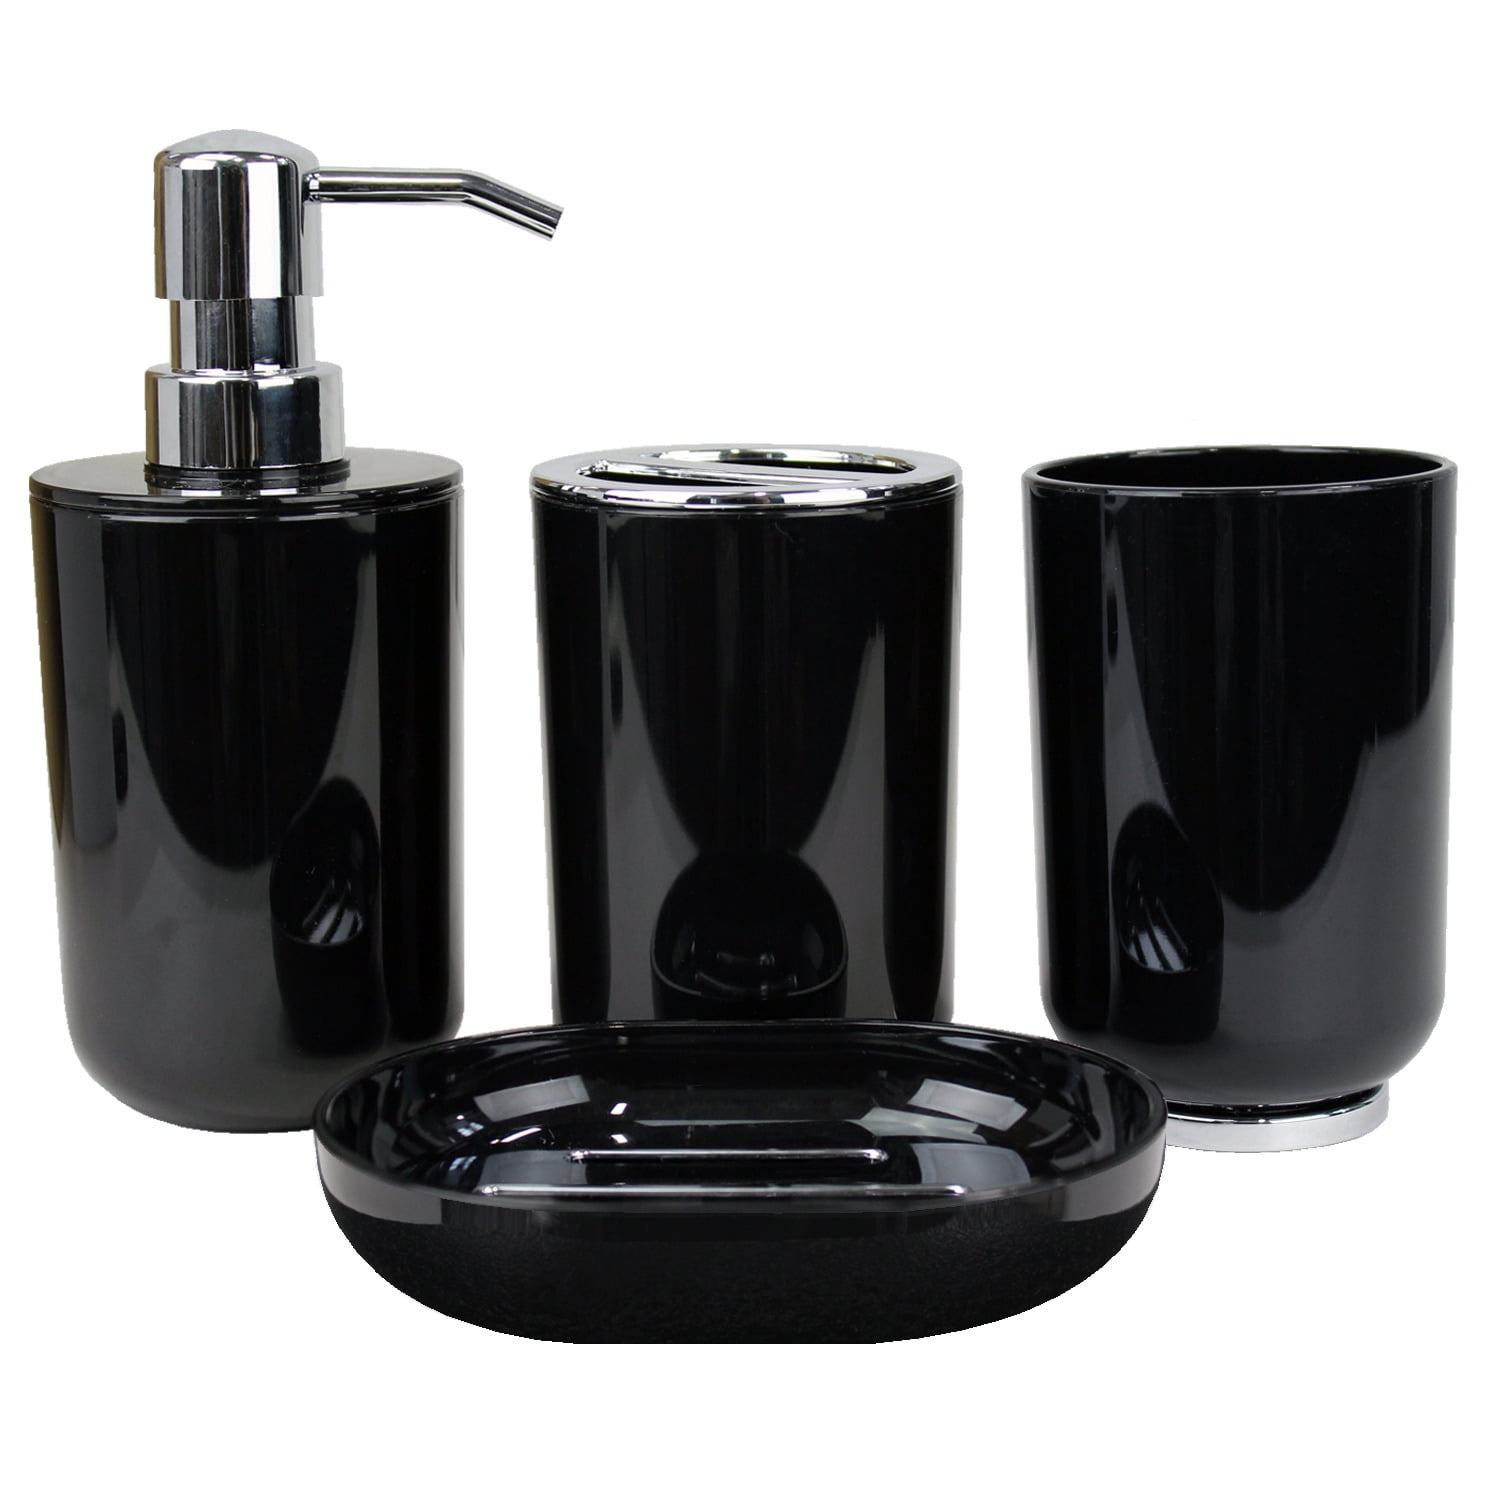 Essentra Home Matte Black Collection 4-Piece Bathroom Accessory Set. Includes: Soap Dispenser with Chrome Pump, Toothbrush Holder, Tumbler and Soap